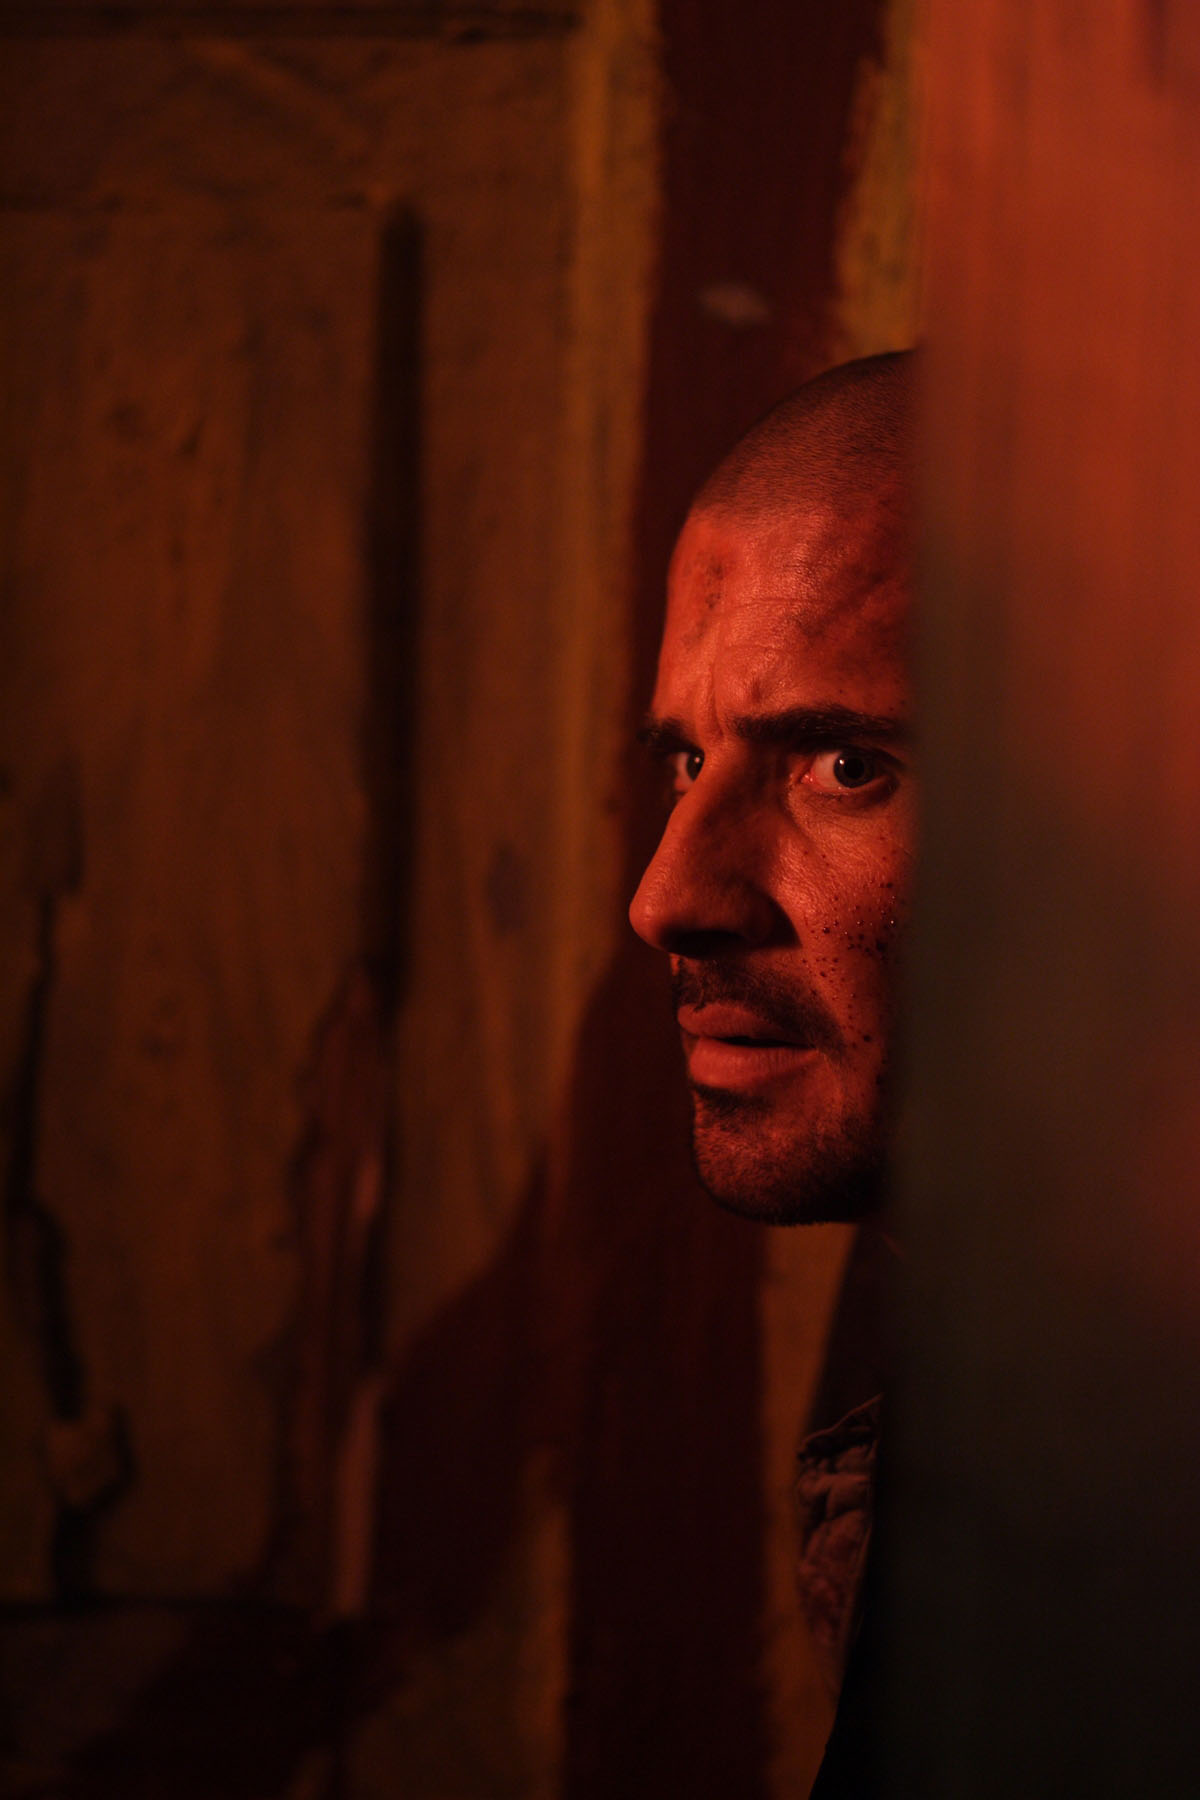  Dominic Purcell stars as &quot;Victor Marshall&quot; in CREEK, from director Joel Schumacher. Photo credit: Toni Salabasev